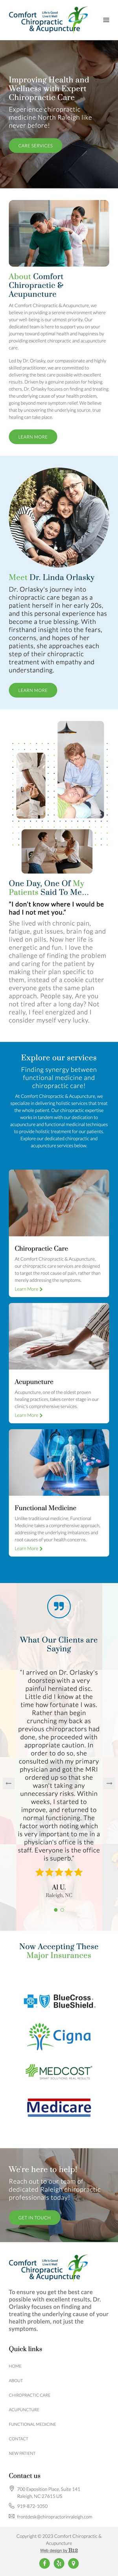 Comfort Chiropractic and Acupuncture